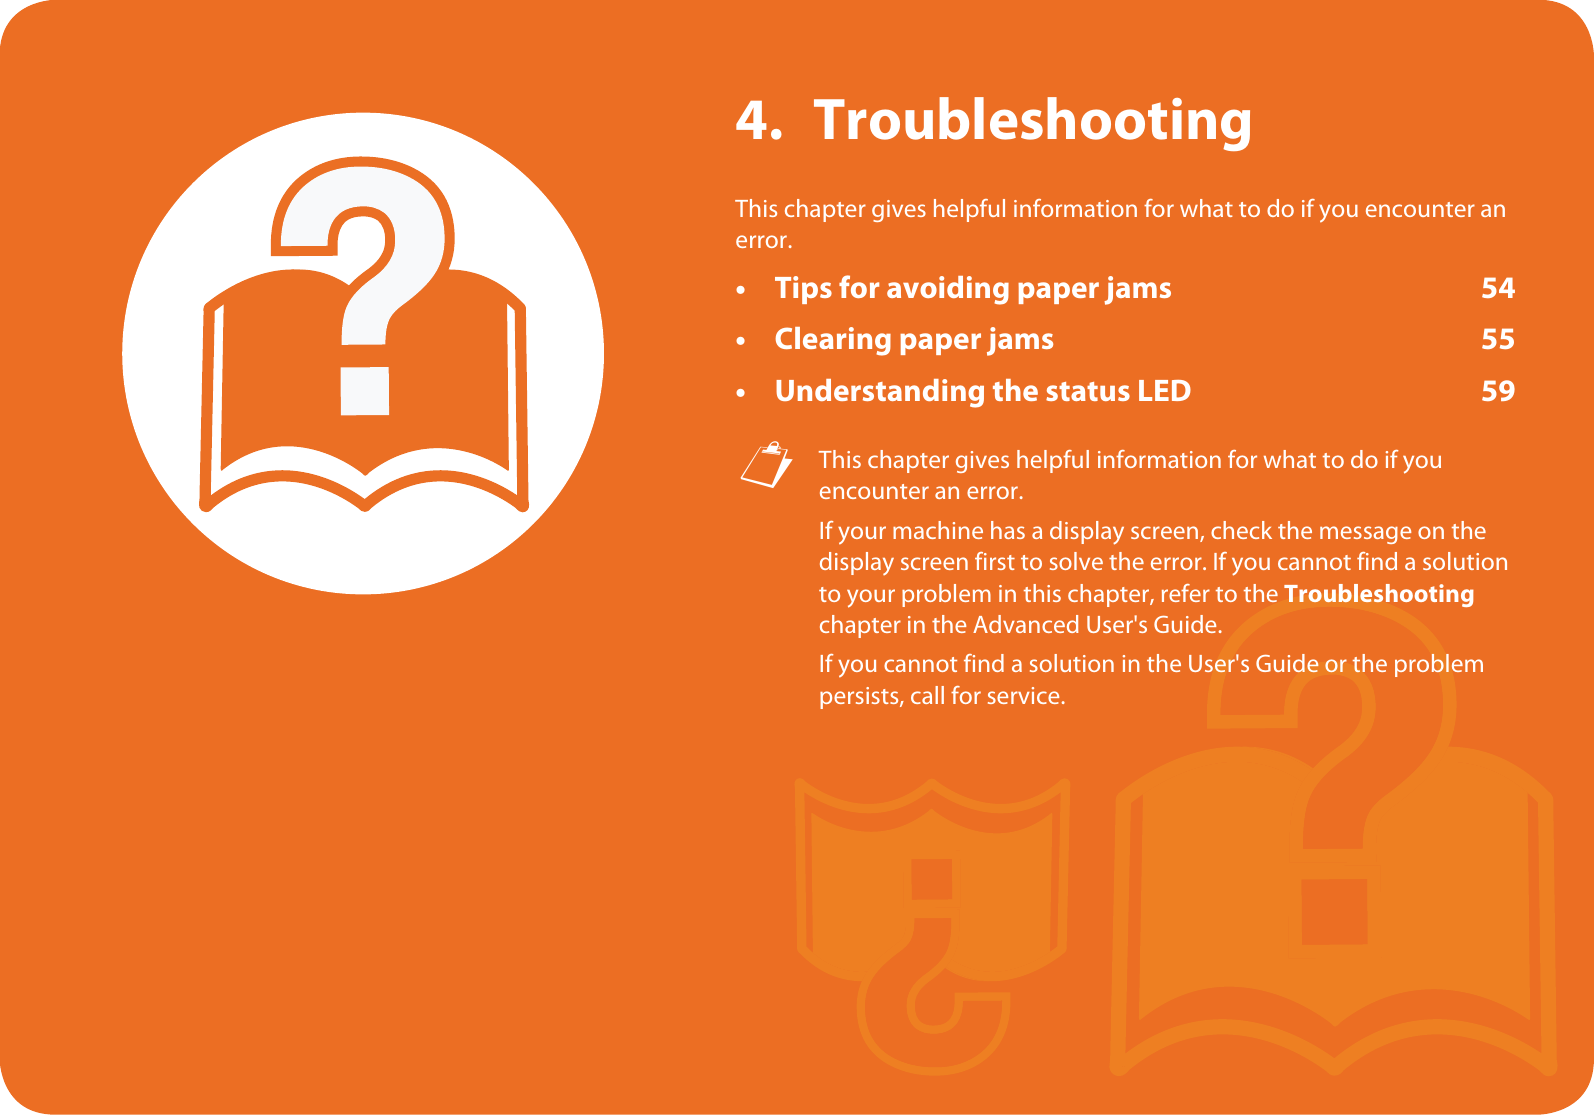 4. TroubleshootingThis chapter gives helpful information for what to do if you encounter an error.• Tips for avoiding paper jams 54• Clearing paper jams 55• Understanding the status LED 59 This chapter gives helpful information for what to do if you encounter an error.If your machine has a display screen, check the message on the display screen first to solve the error. If you cannot find a solution to your problem in this chapter, refer to the Troubleshooting chapter in the Advanced User&apos;s Guide.If you cannot find a solution in the User&apos;s Guide or the problem persists, call for service. 